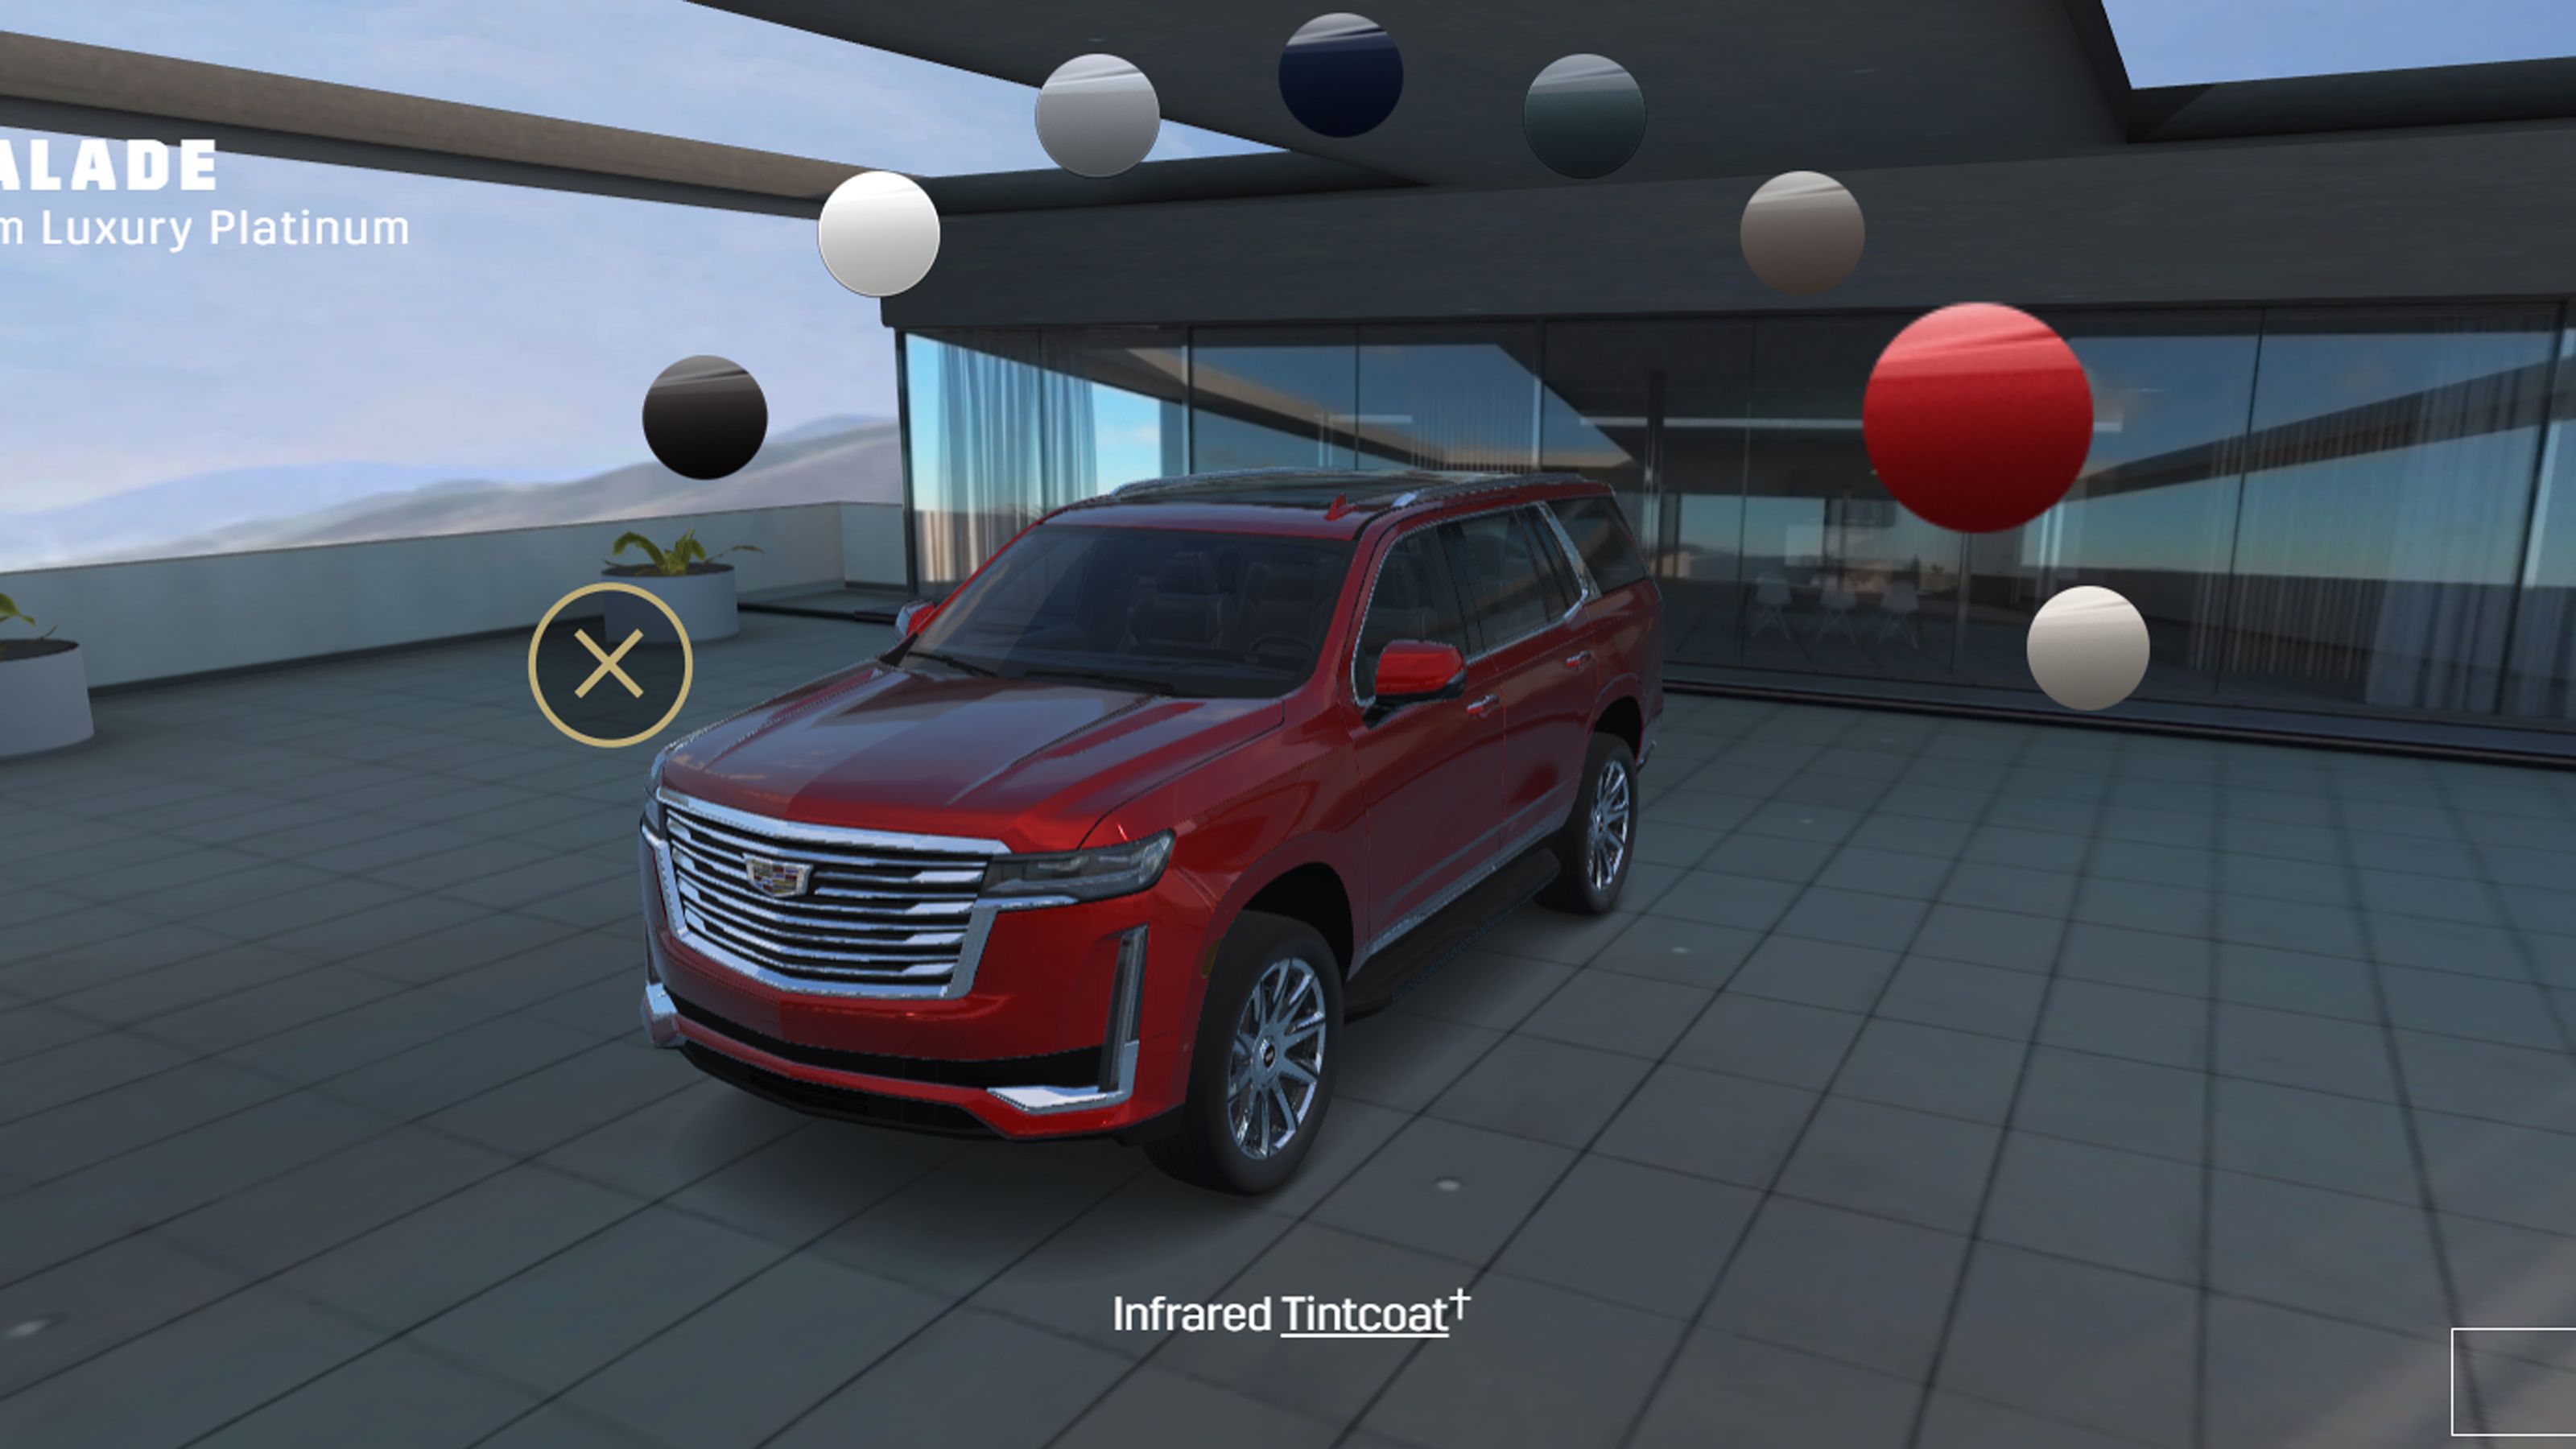 Here Are All The Optional Colors Of The 2021 Cadillac Escalade